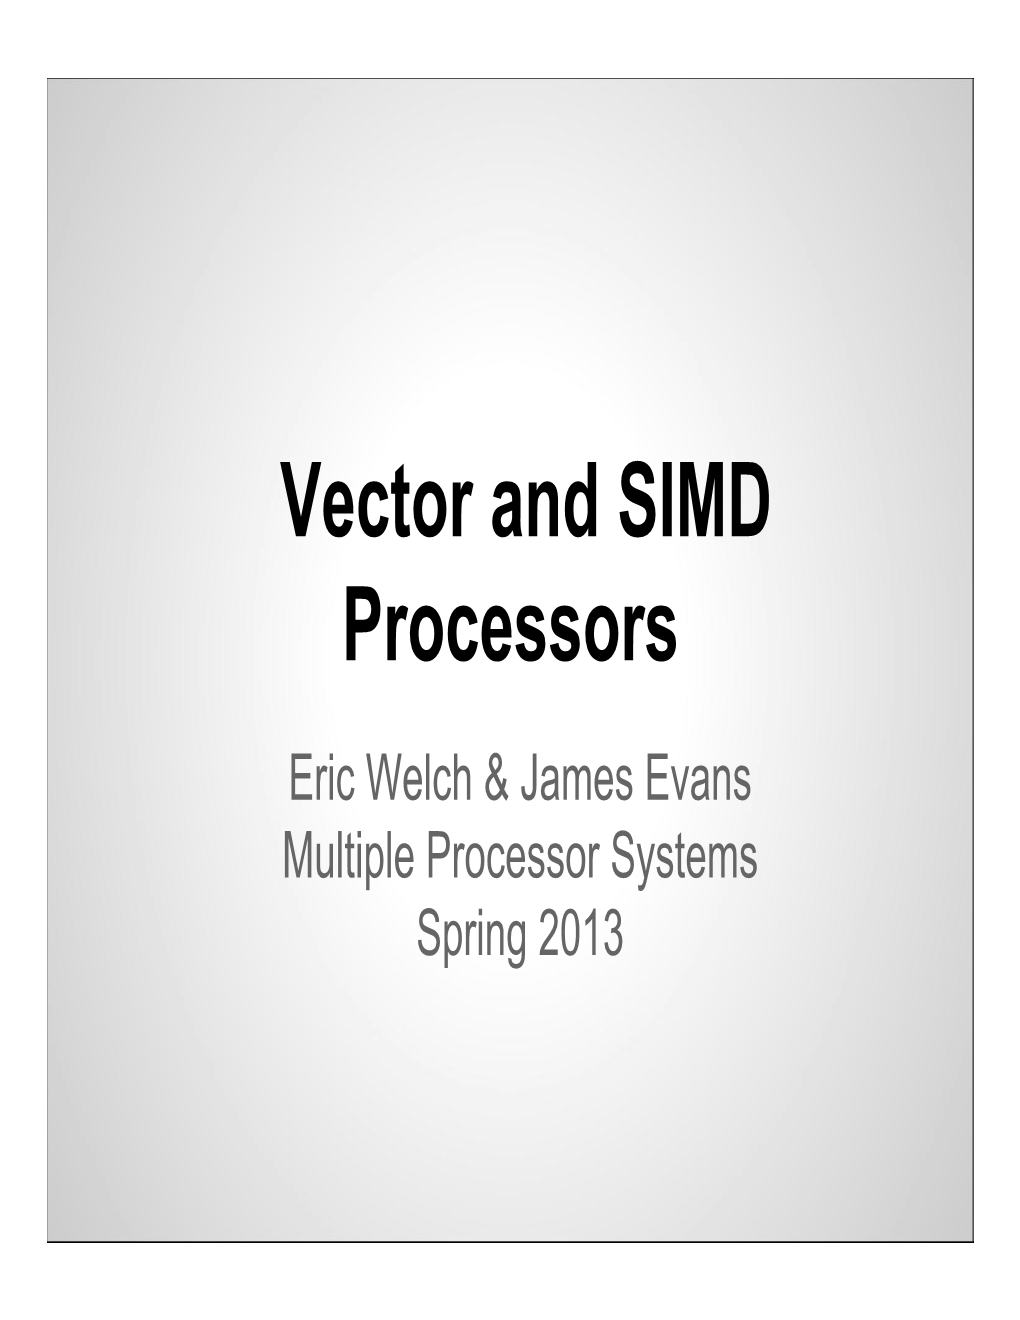 Vector and SIMD Processors